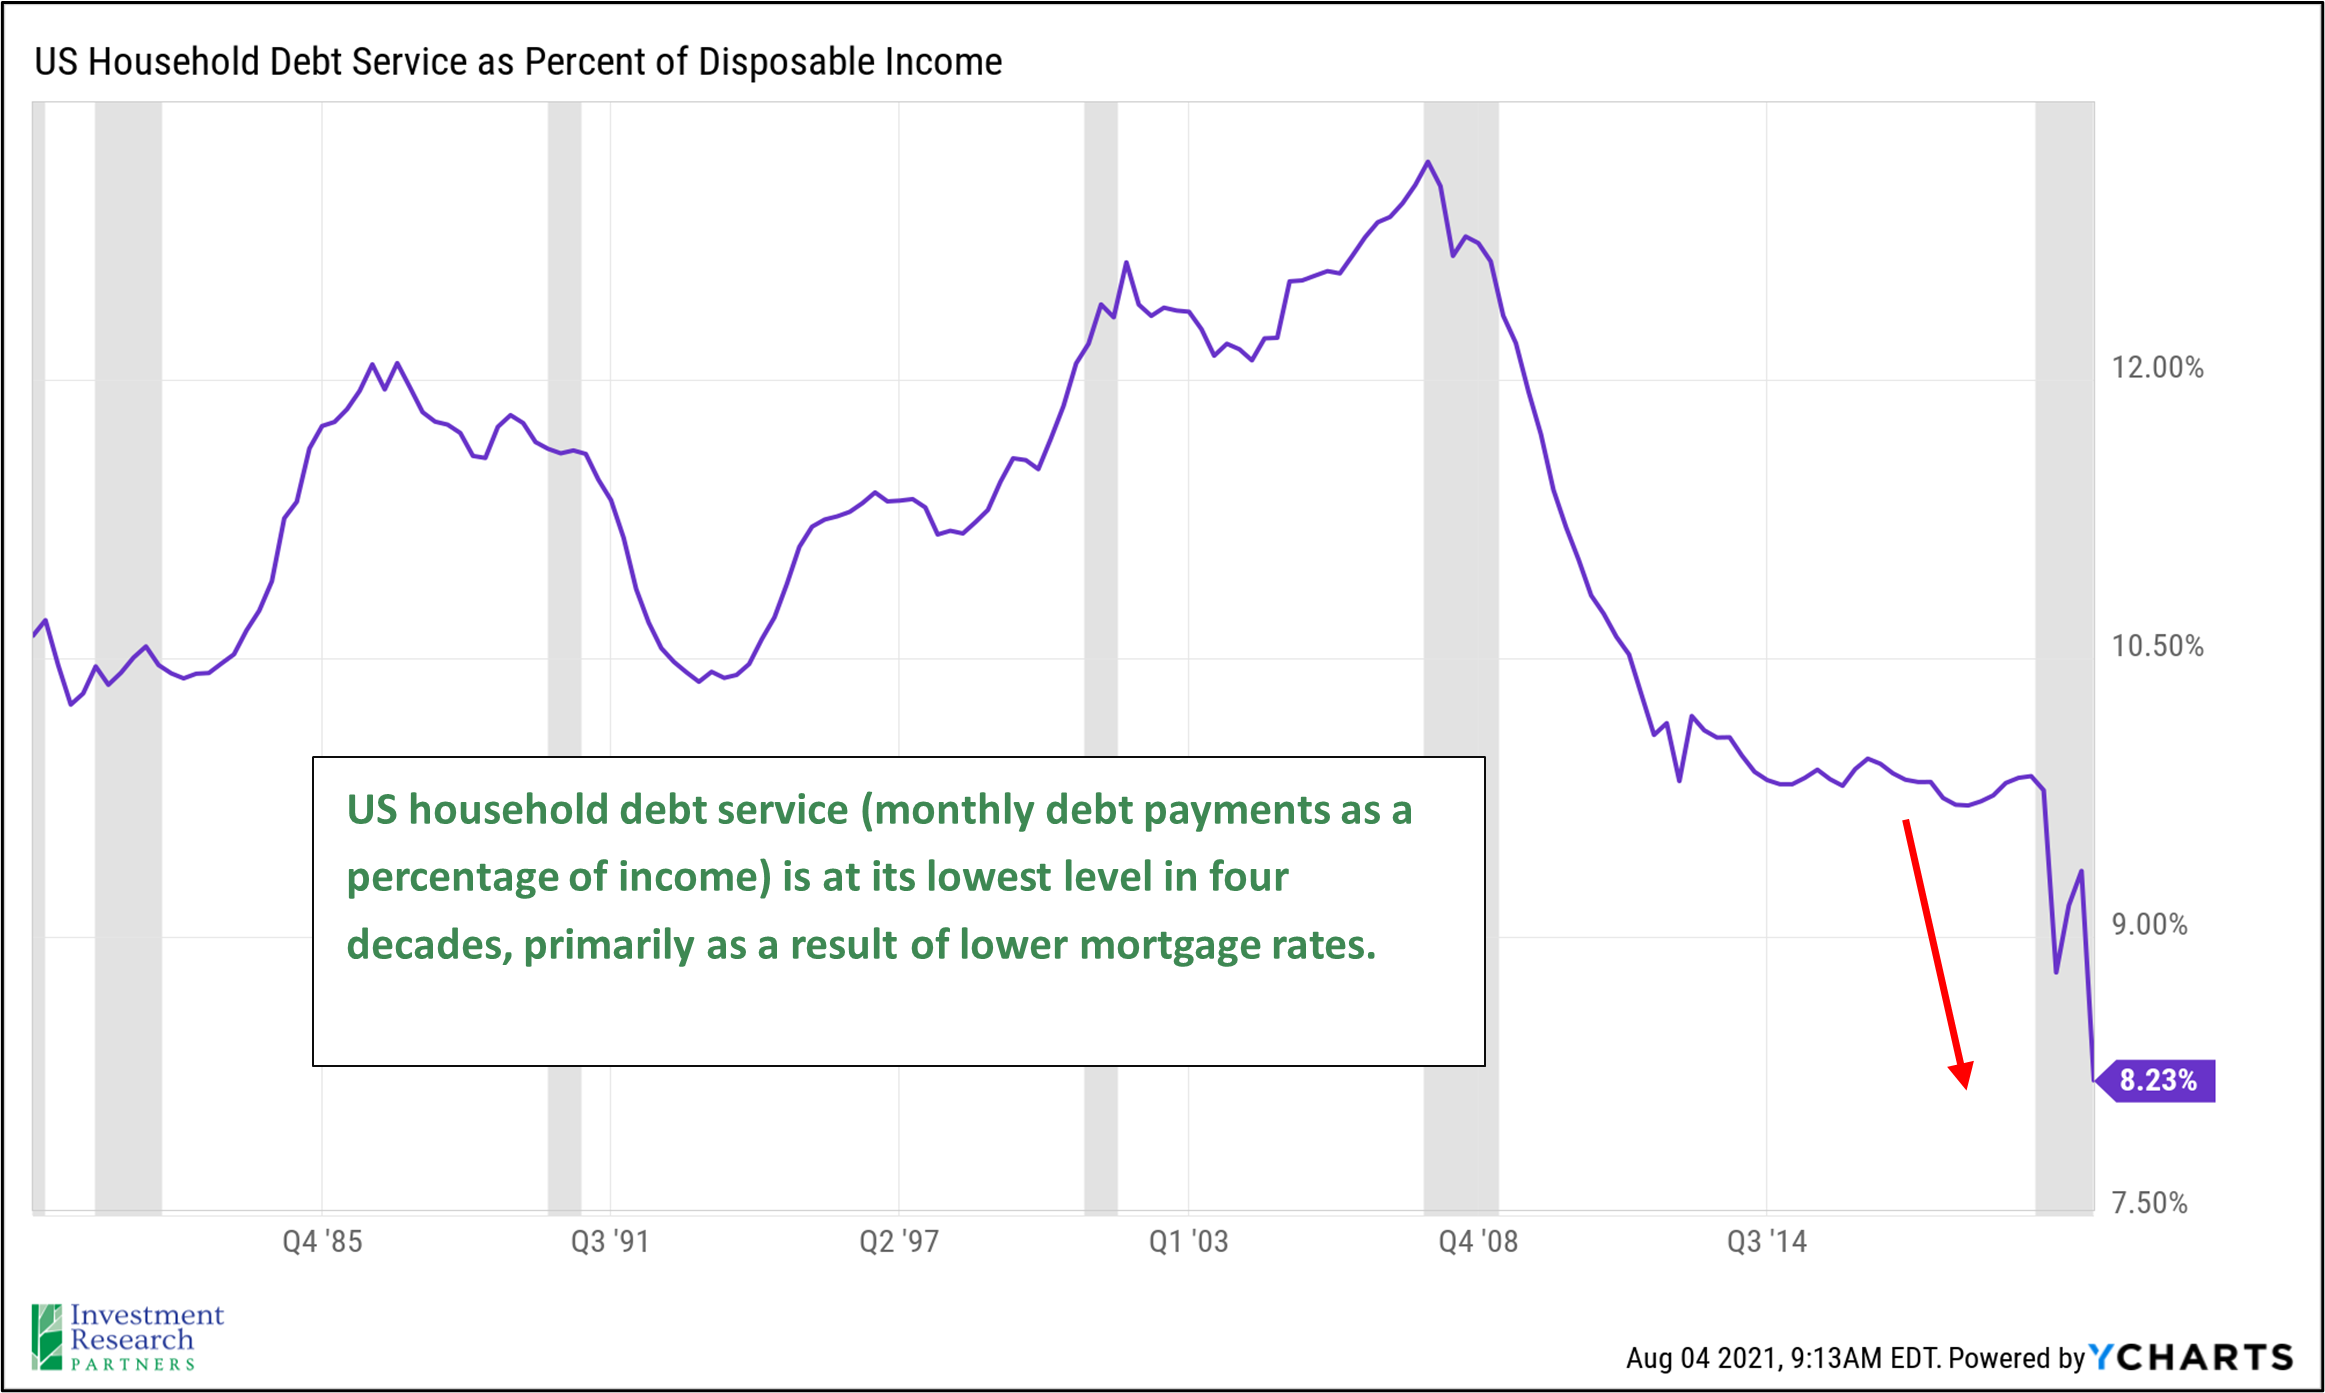 Line graph depicting US Household Debt Service as Percent of Disposable Income from Q4 '85 to Q3 '14 with note: US household debt service (monthly debt payments as a percentage of income) is at its lowest level in four decades, primarily as a result of lower mortgage rates.